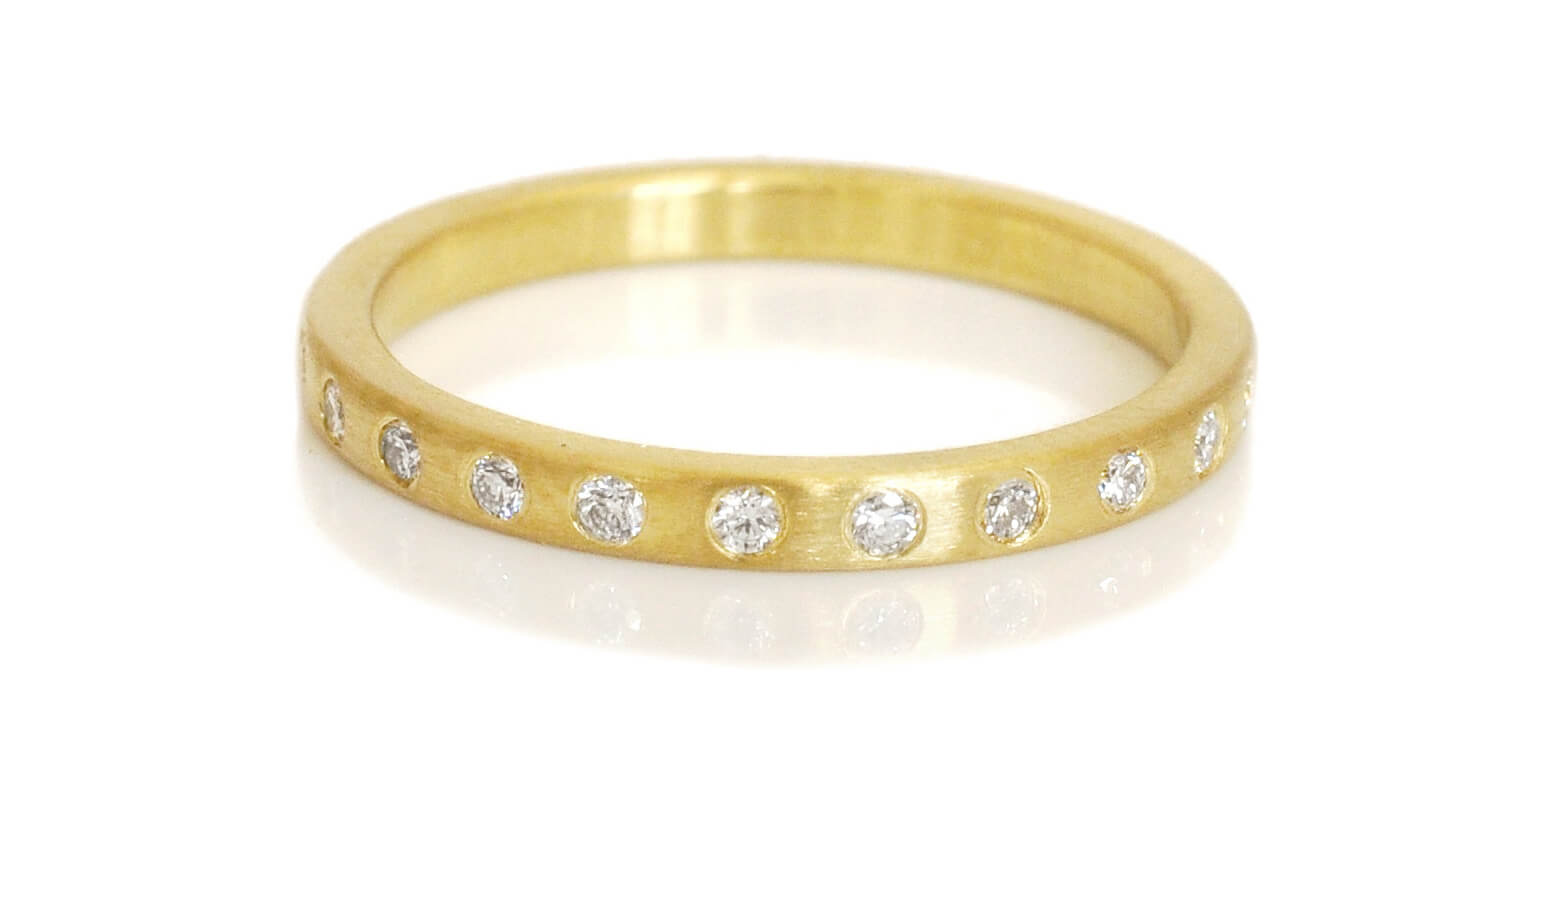 Yellow gold eternity band from EC Design Jewelry in Minneapolis, MN.